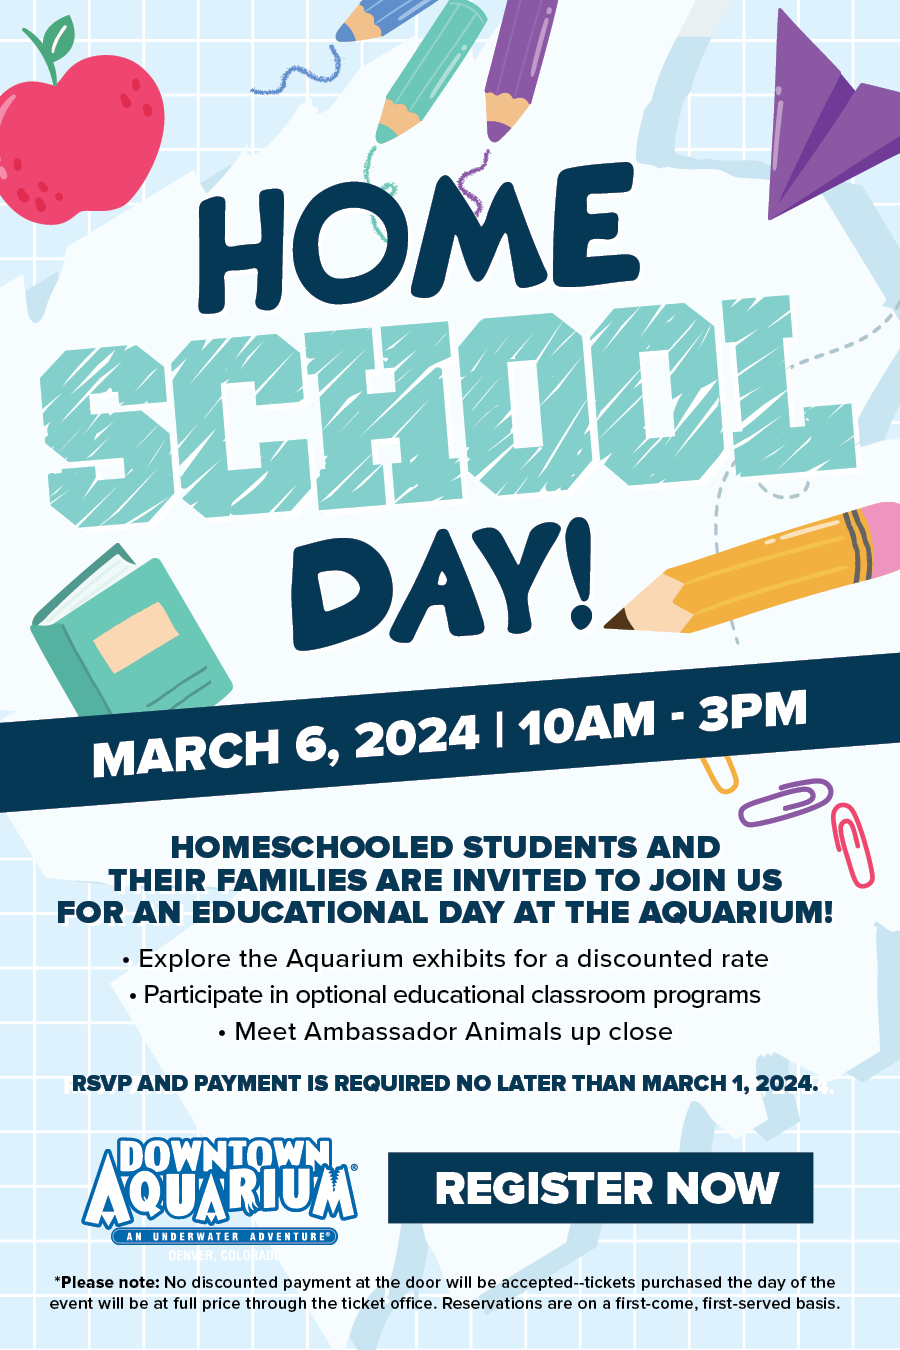 Homeschooled students and their families are invited for an educational day at the Aquarium!